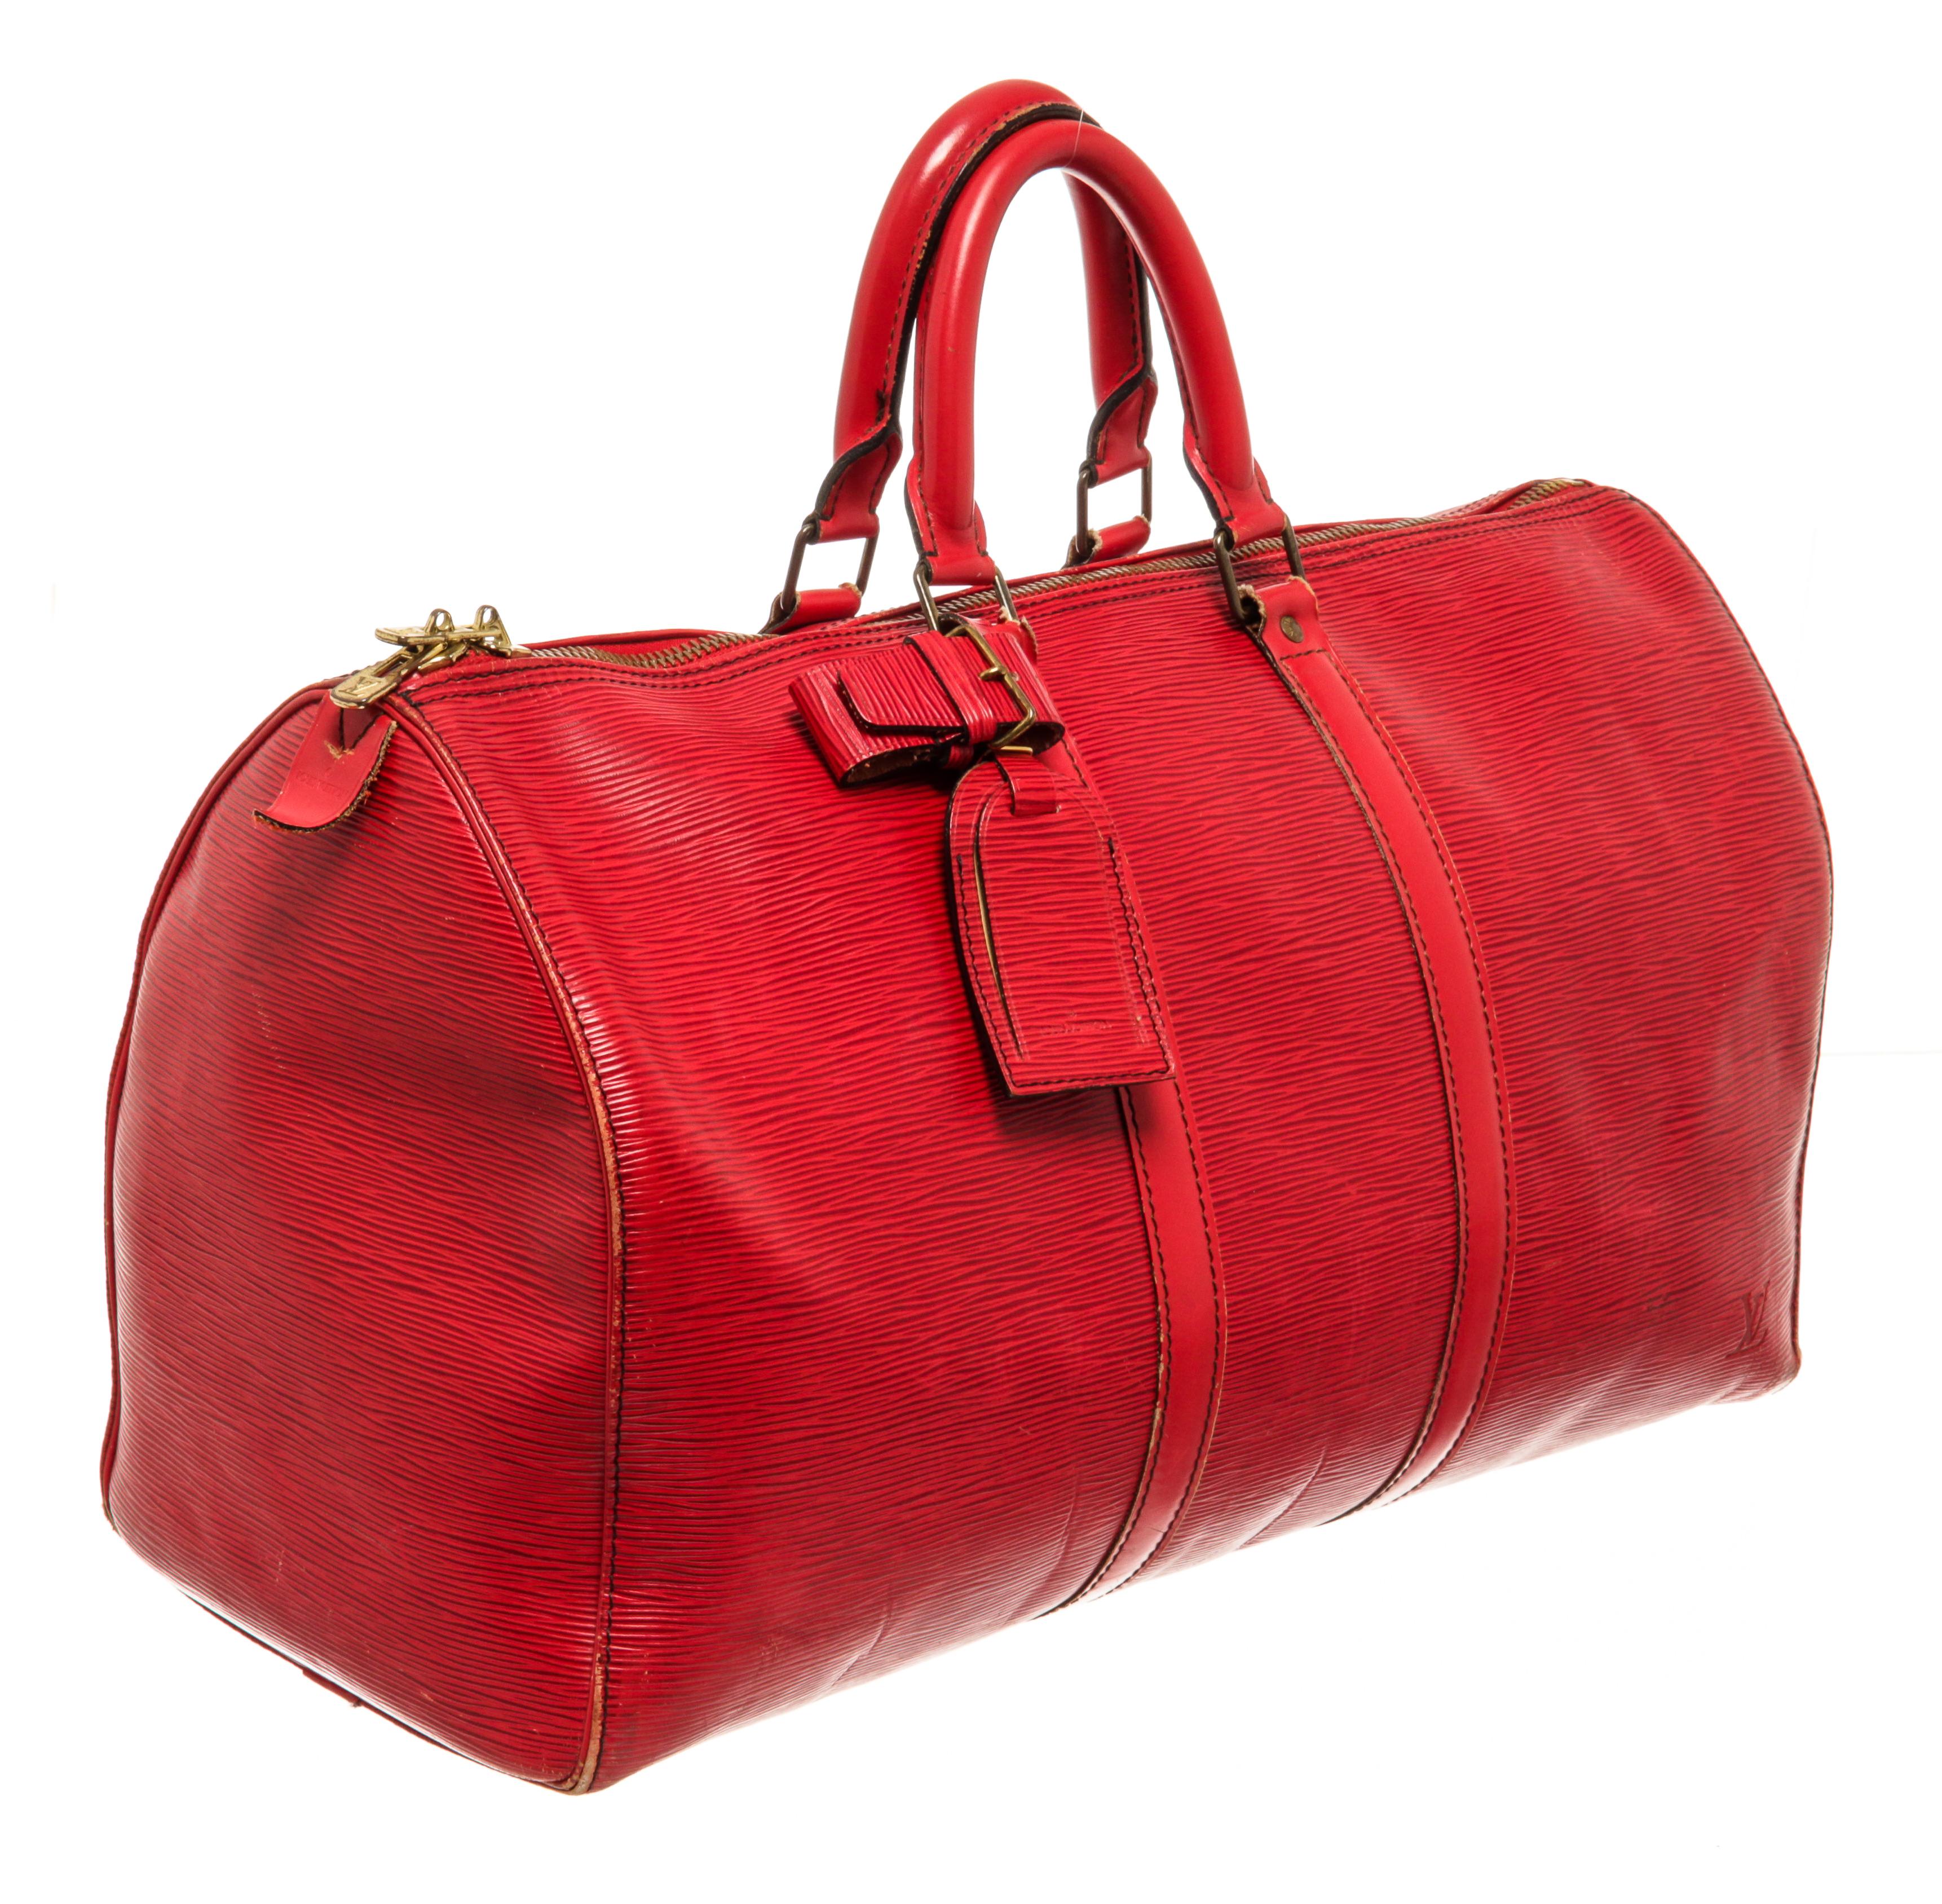 Louis Vuitton Red Epi Leather Keepall 45cm Duffel Luggage Bag with gold-tone hardware, red canvas trim, exterior slip pocket at the side, leather luggage tag, LV embossed logo, red suede lining, dual rolled leather top handles, and zip closure at